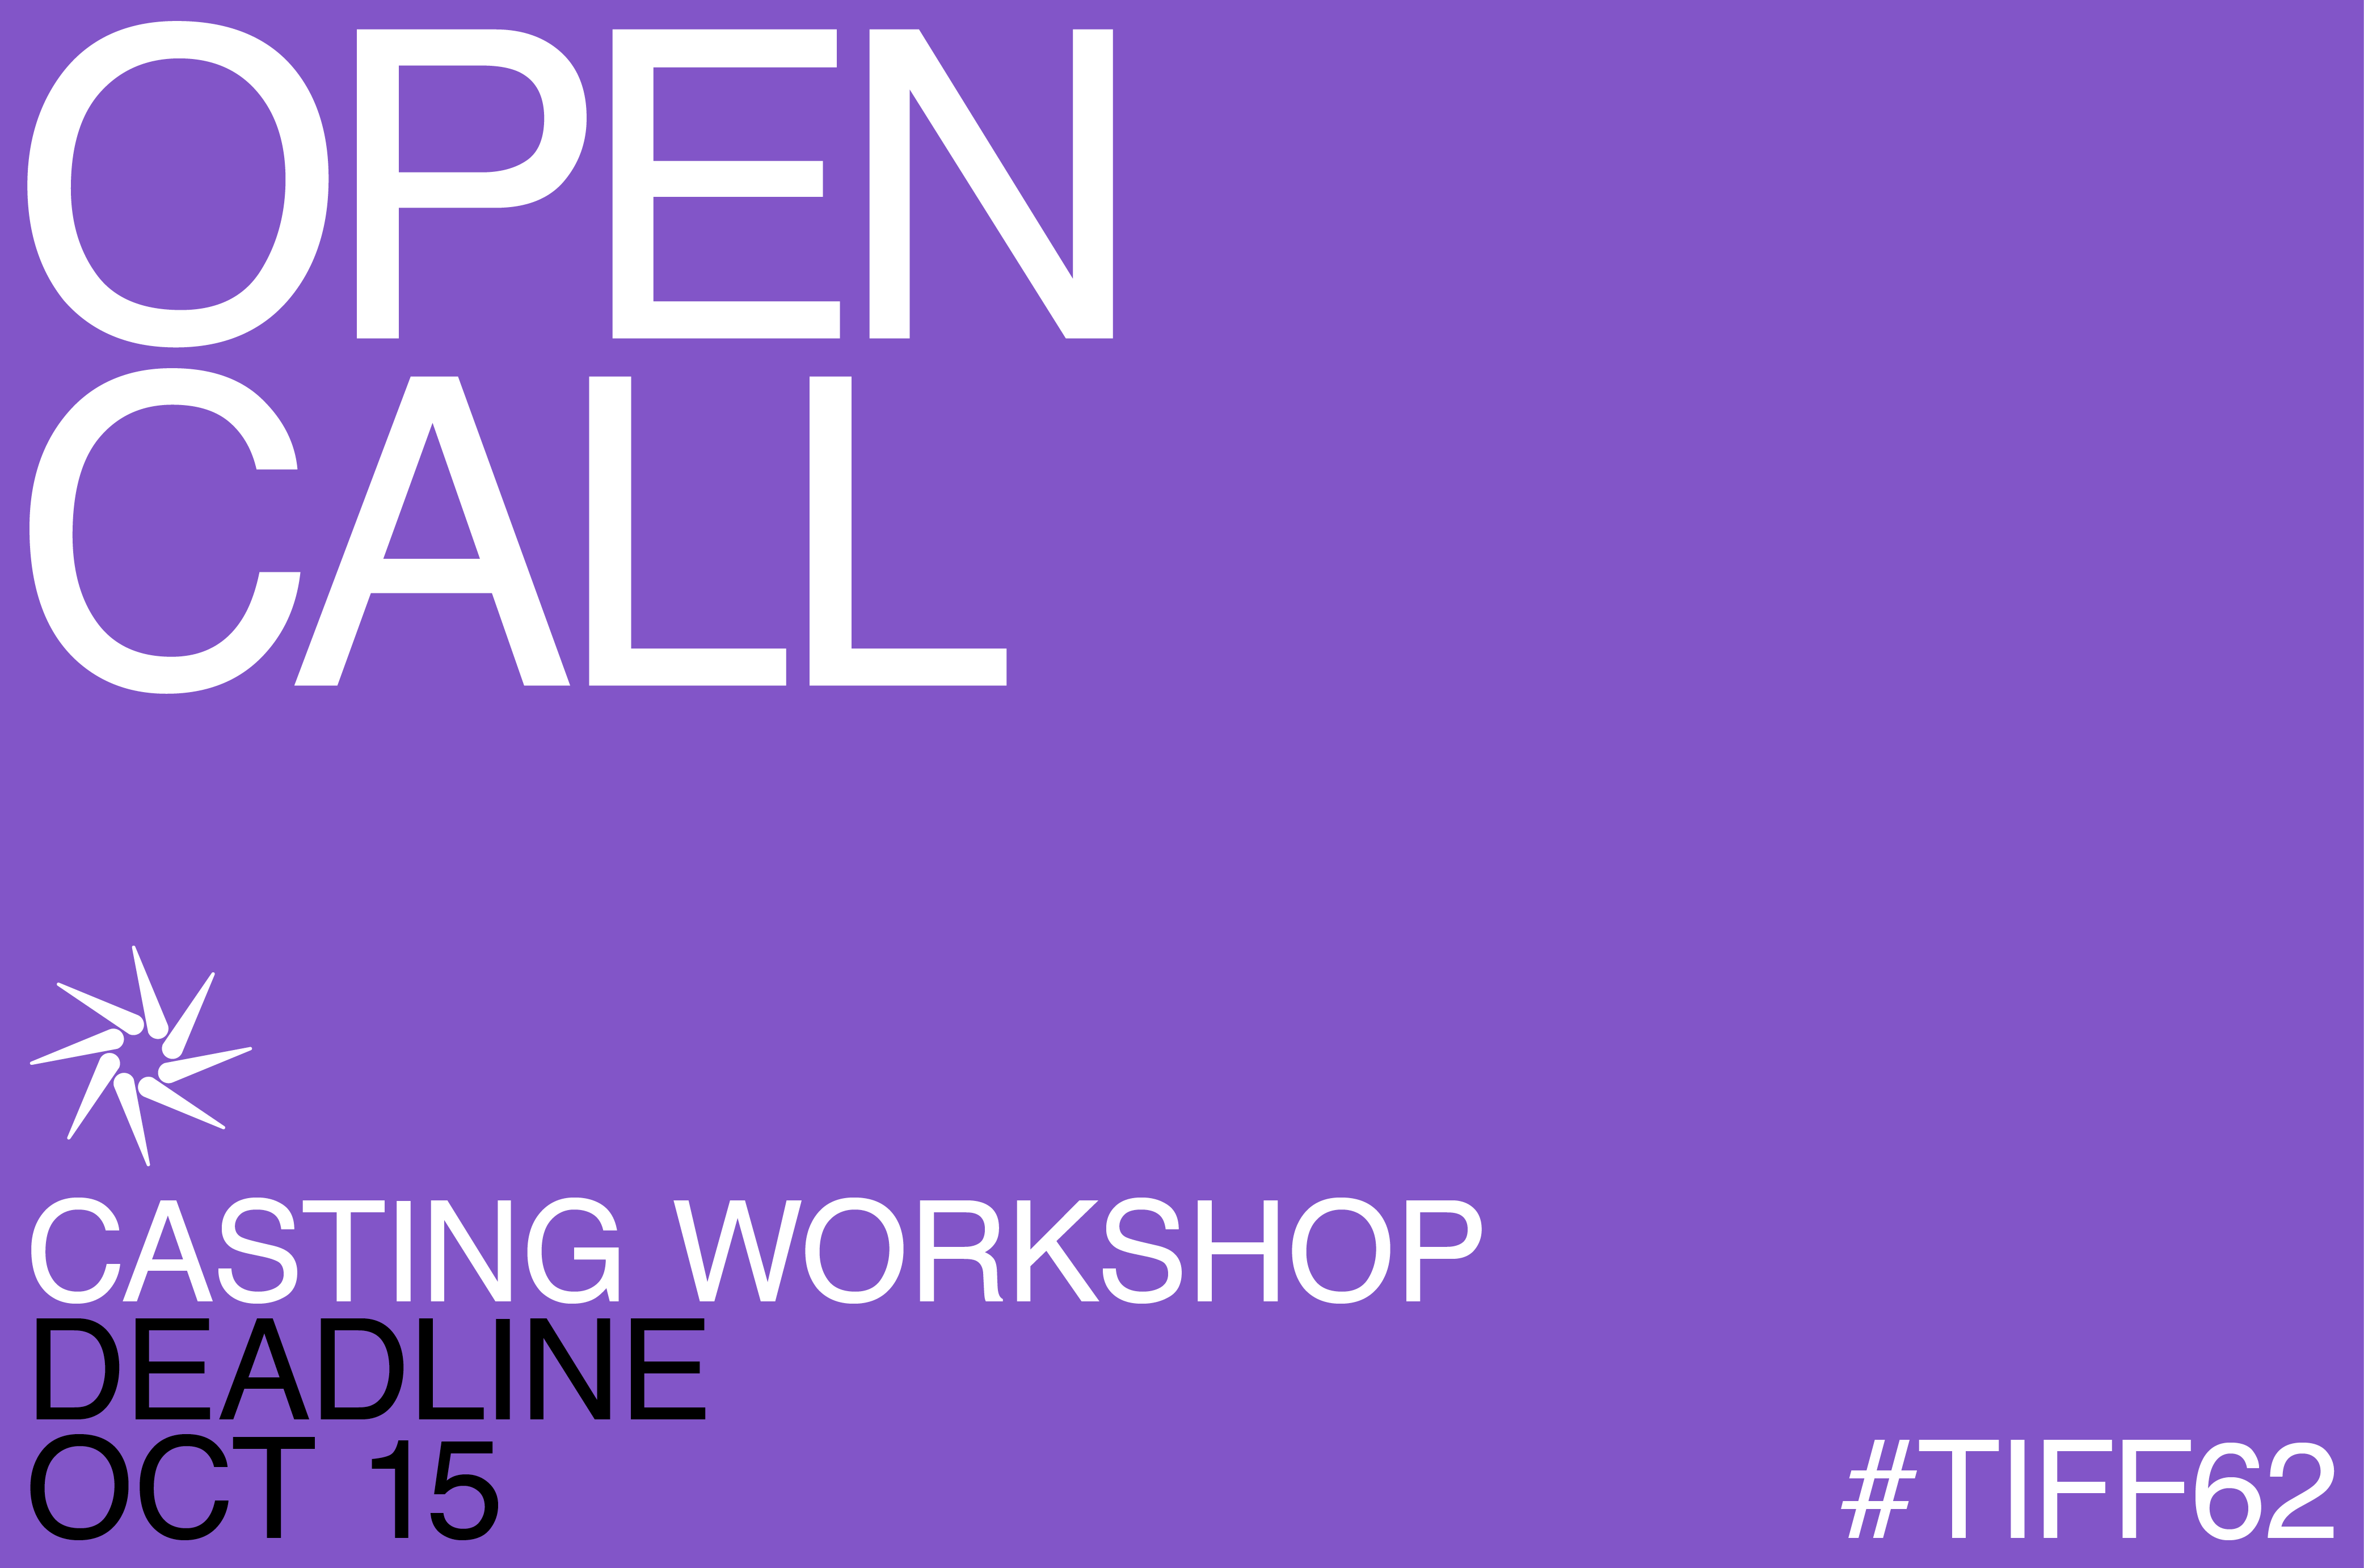 open_call_casting_workshop.png